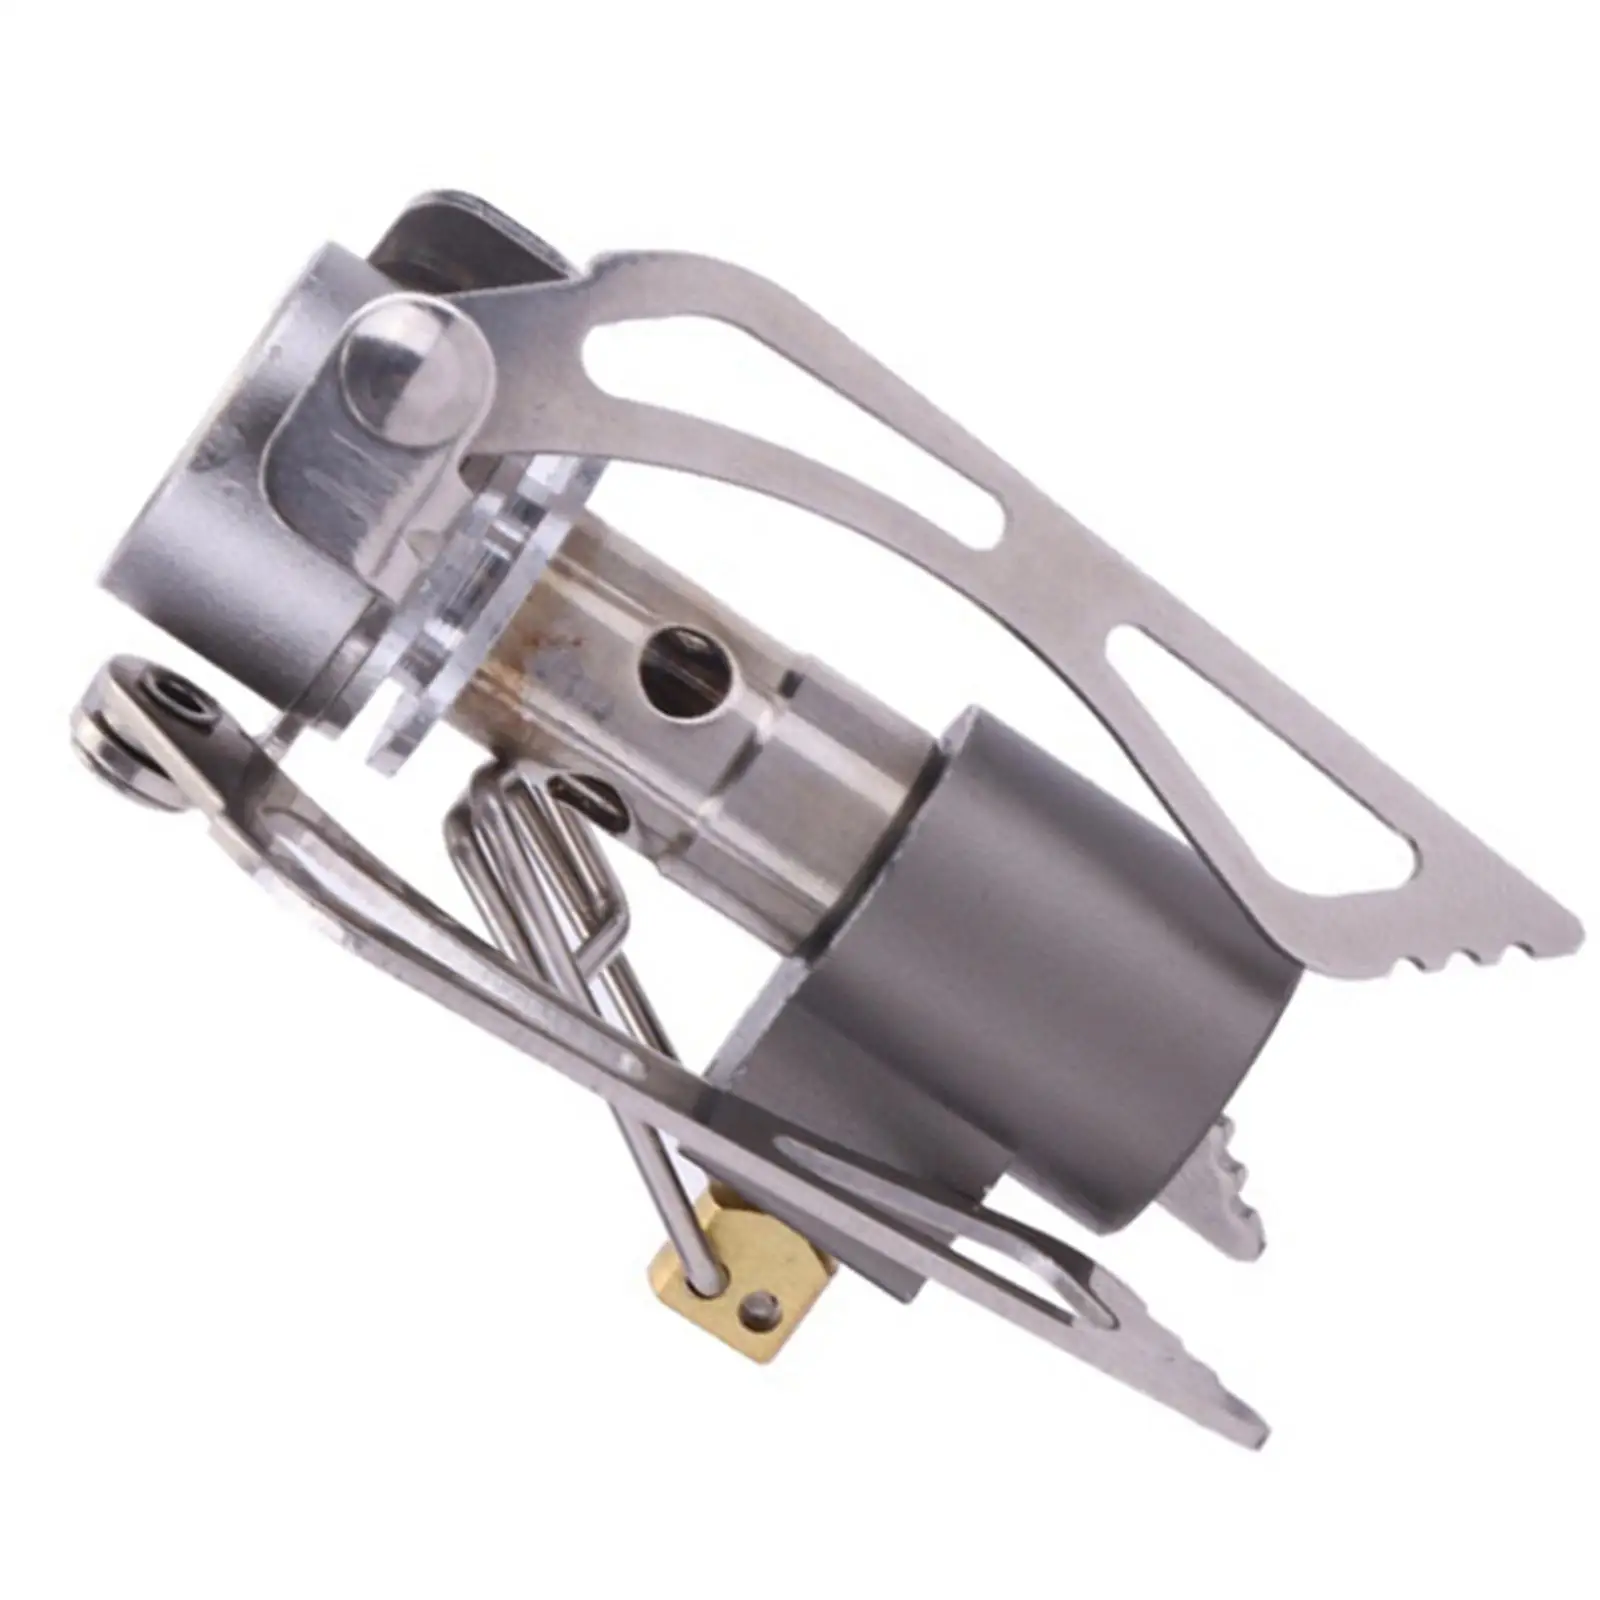 Camping Stove Tourist Burner Outdoor Stainless Steel Oven for Mountaineering